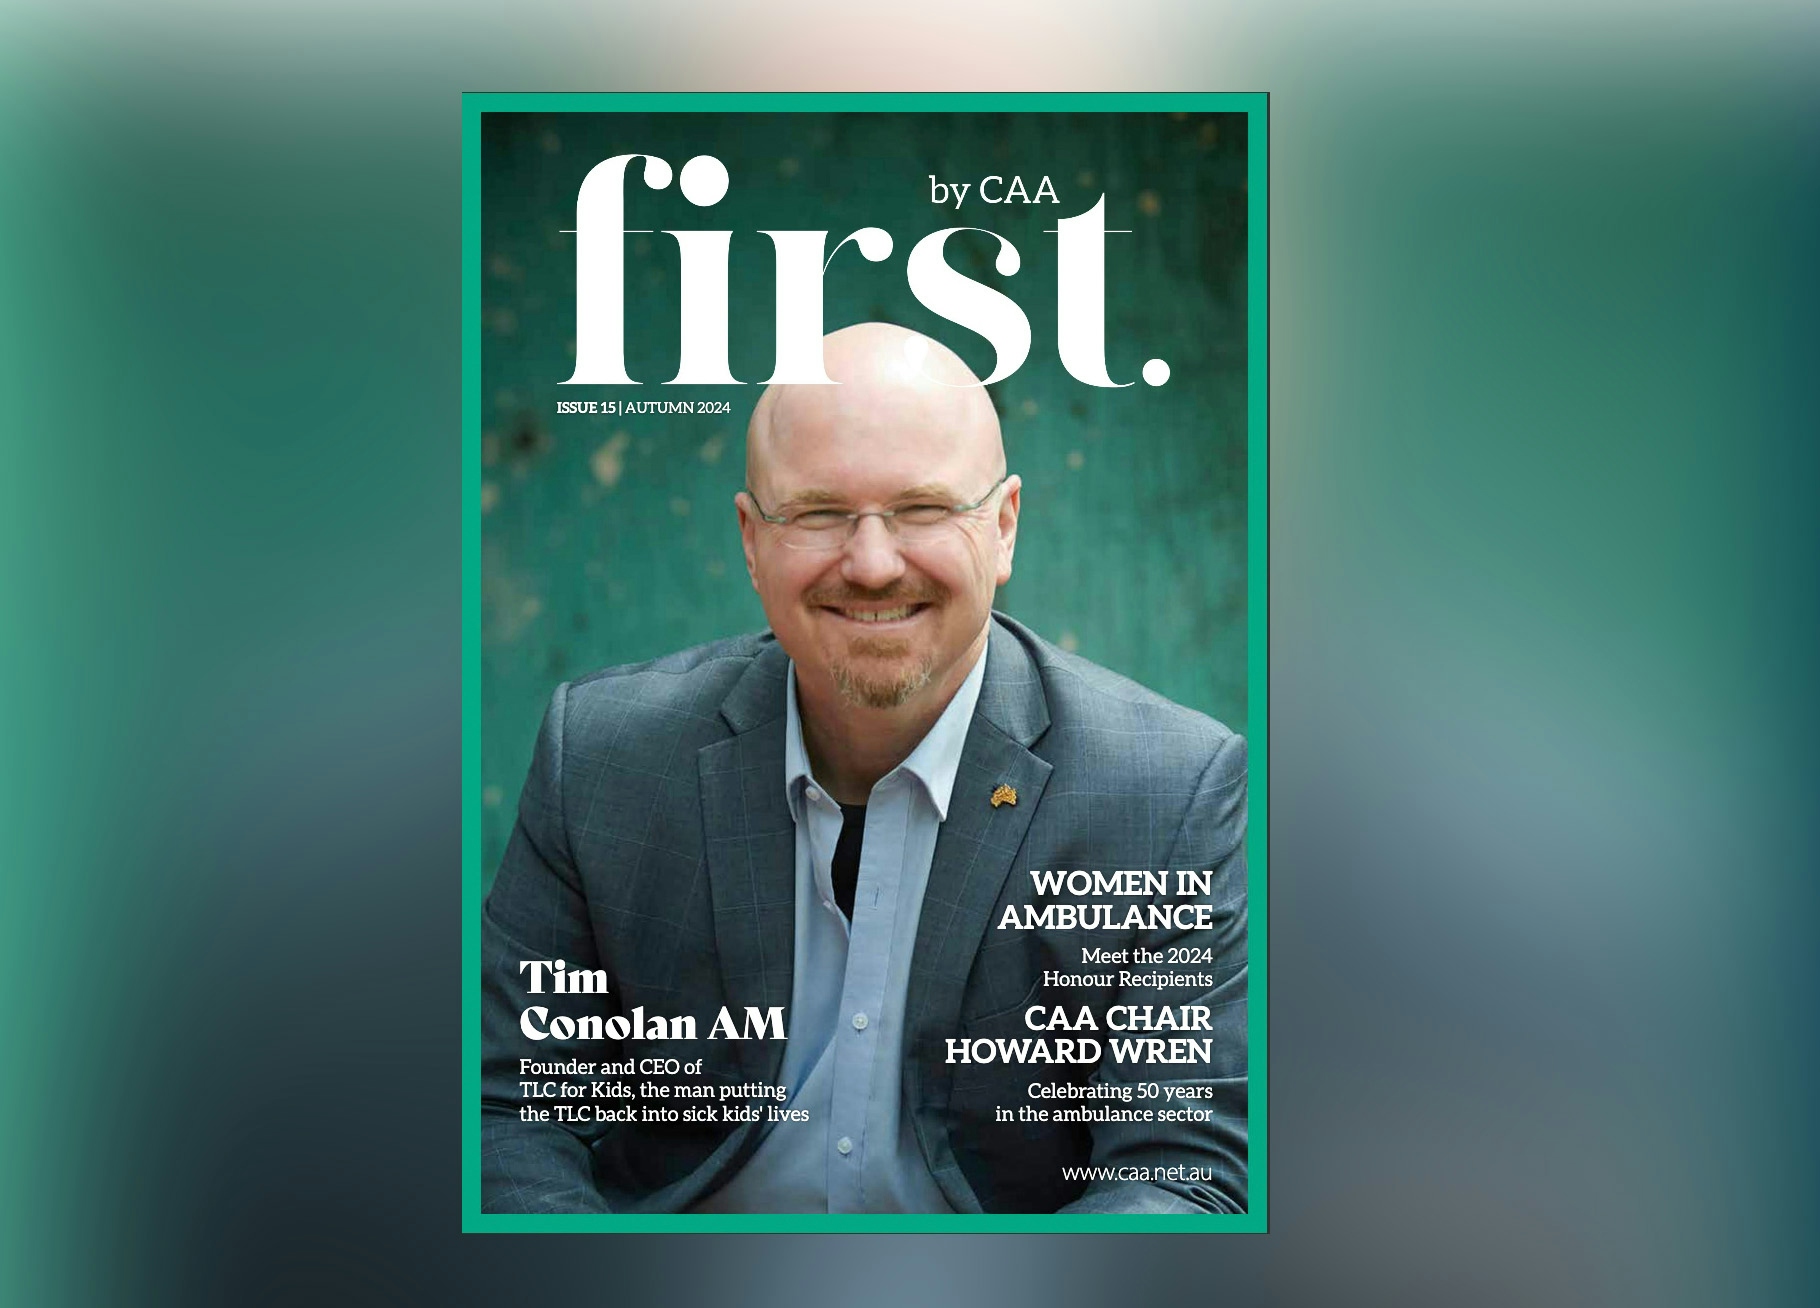 Thumbnail for Tim Conolan AM Featured in FIRST Magazine by CAA: A Journey of Impact and Compassion